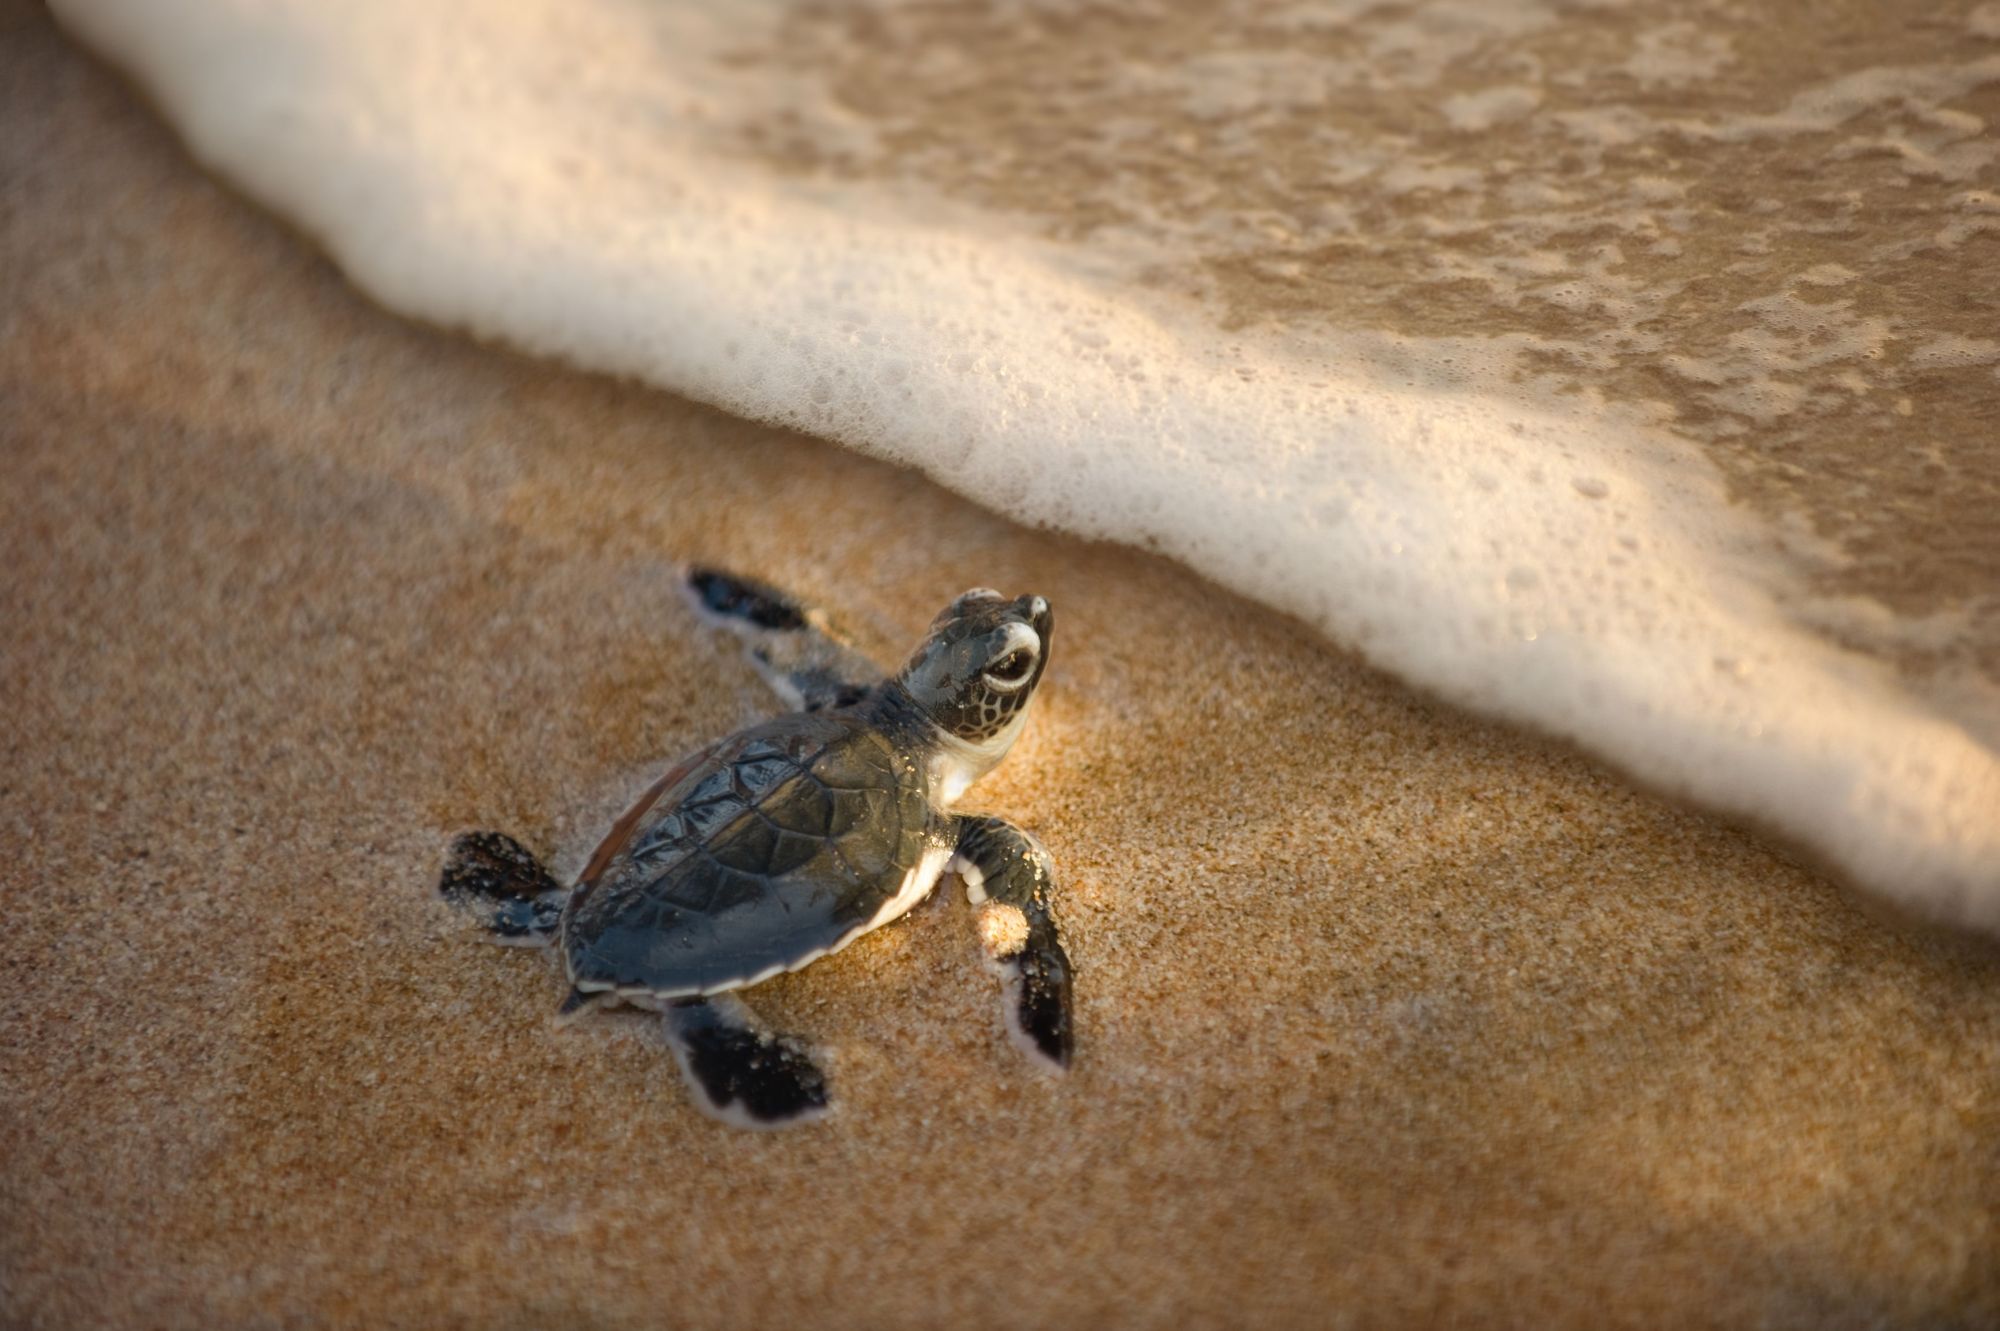 http://www.dreamstime.com/stock-photos-newly-hatched-baby-turtle-toward-ocean-image22466773